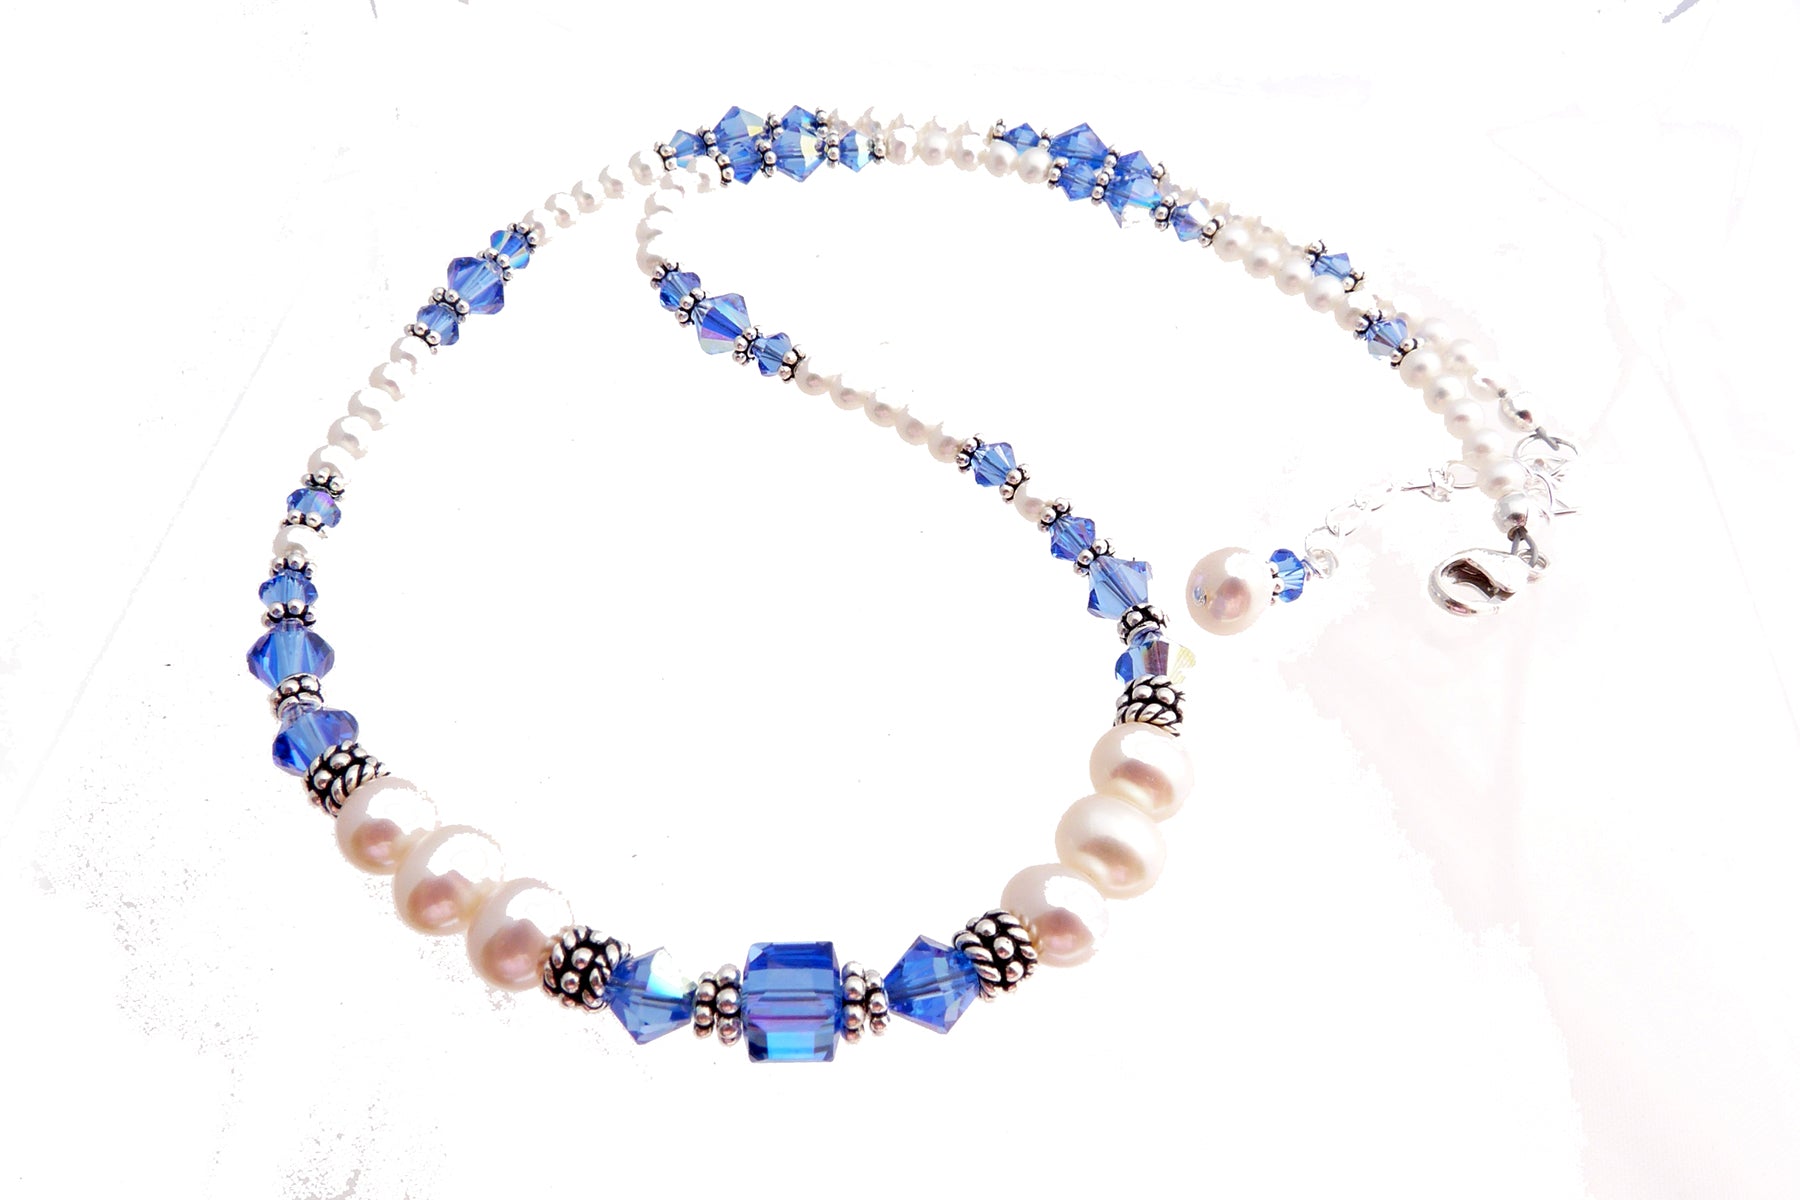 Freshwater Pearl Necklaces, Birthstone Jewelry, Genuine Austrian Crystals